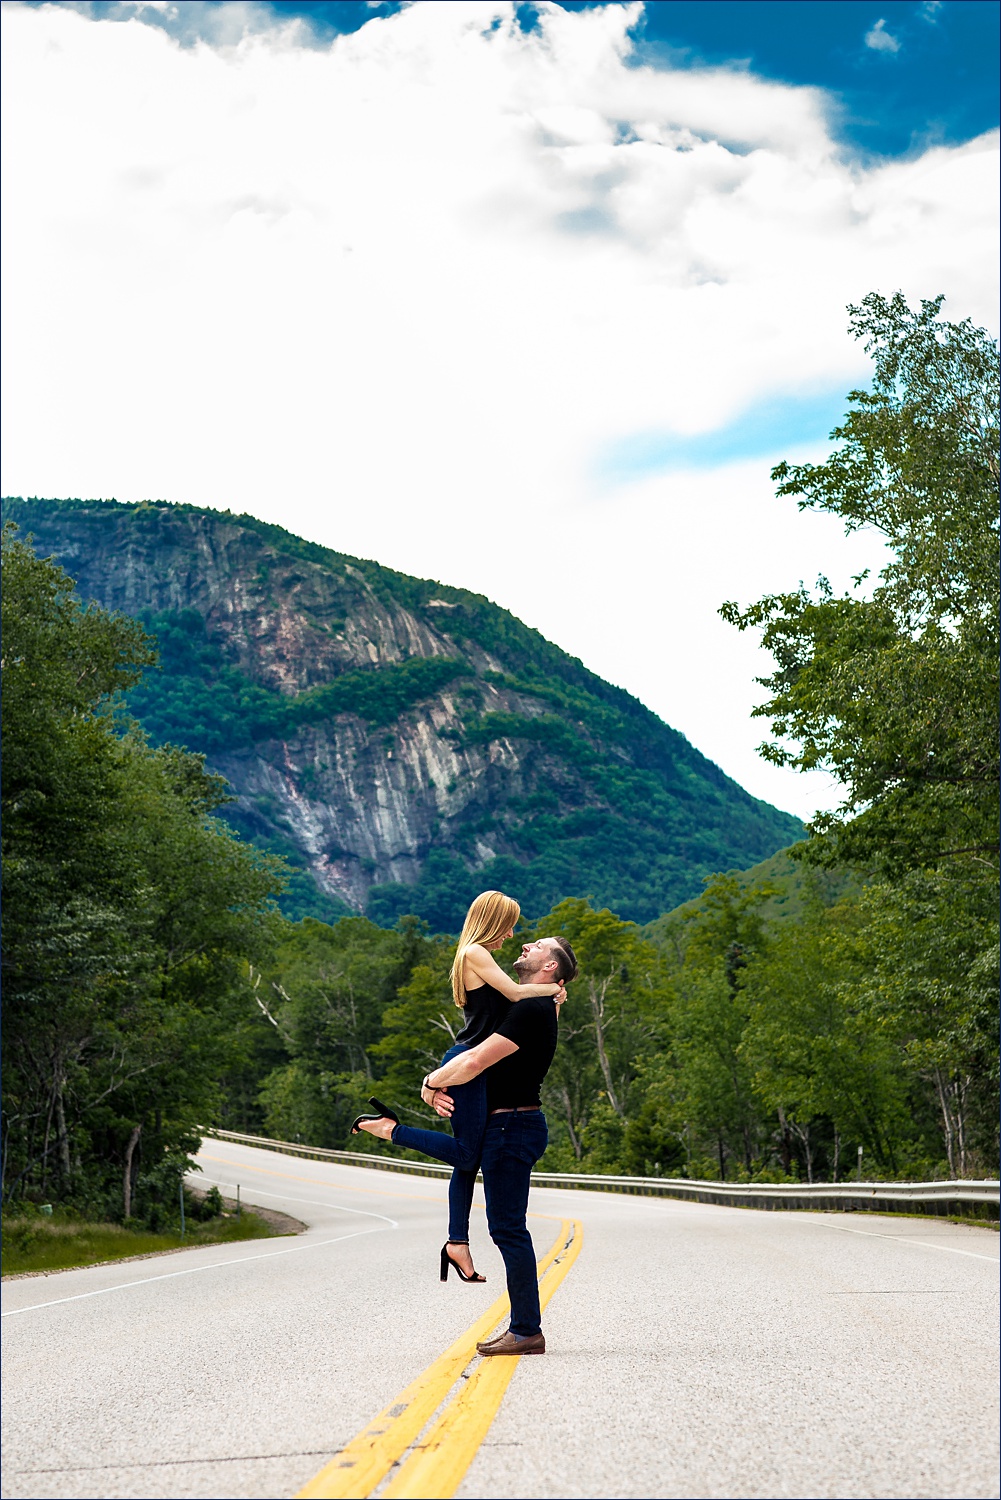 The couple embrace in front of the White Mountains of New Hampshire up in Crawford Notch